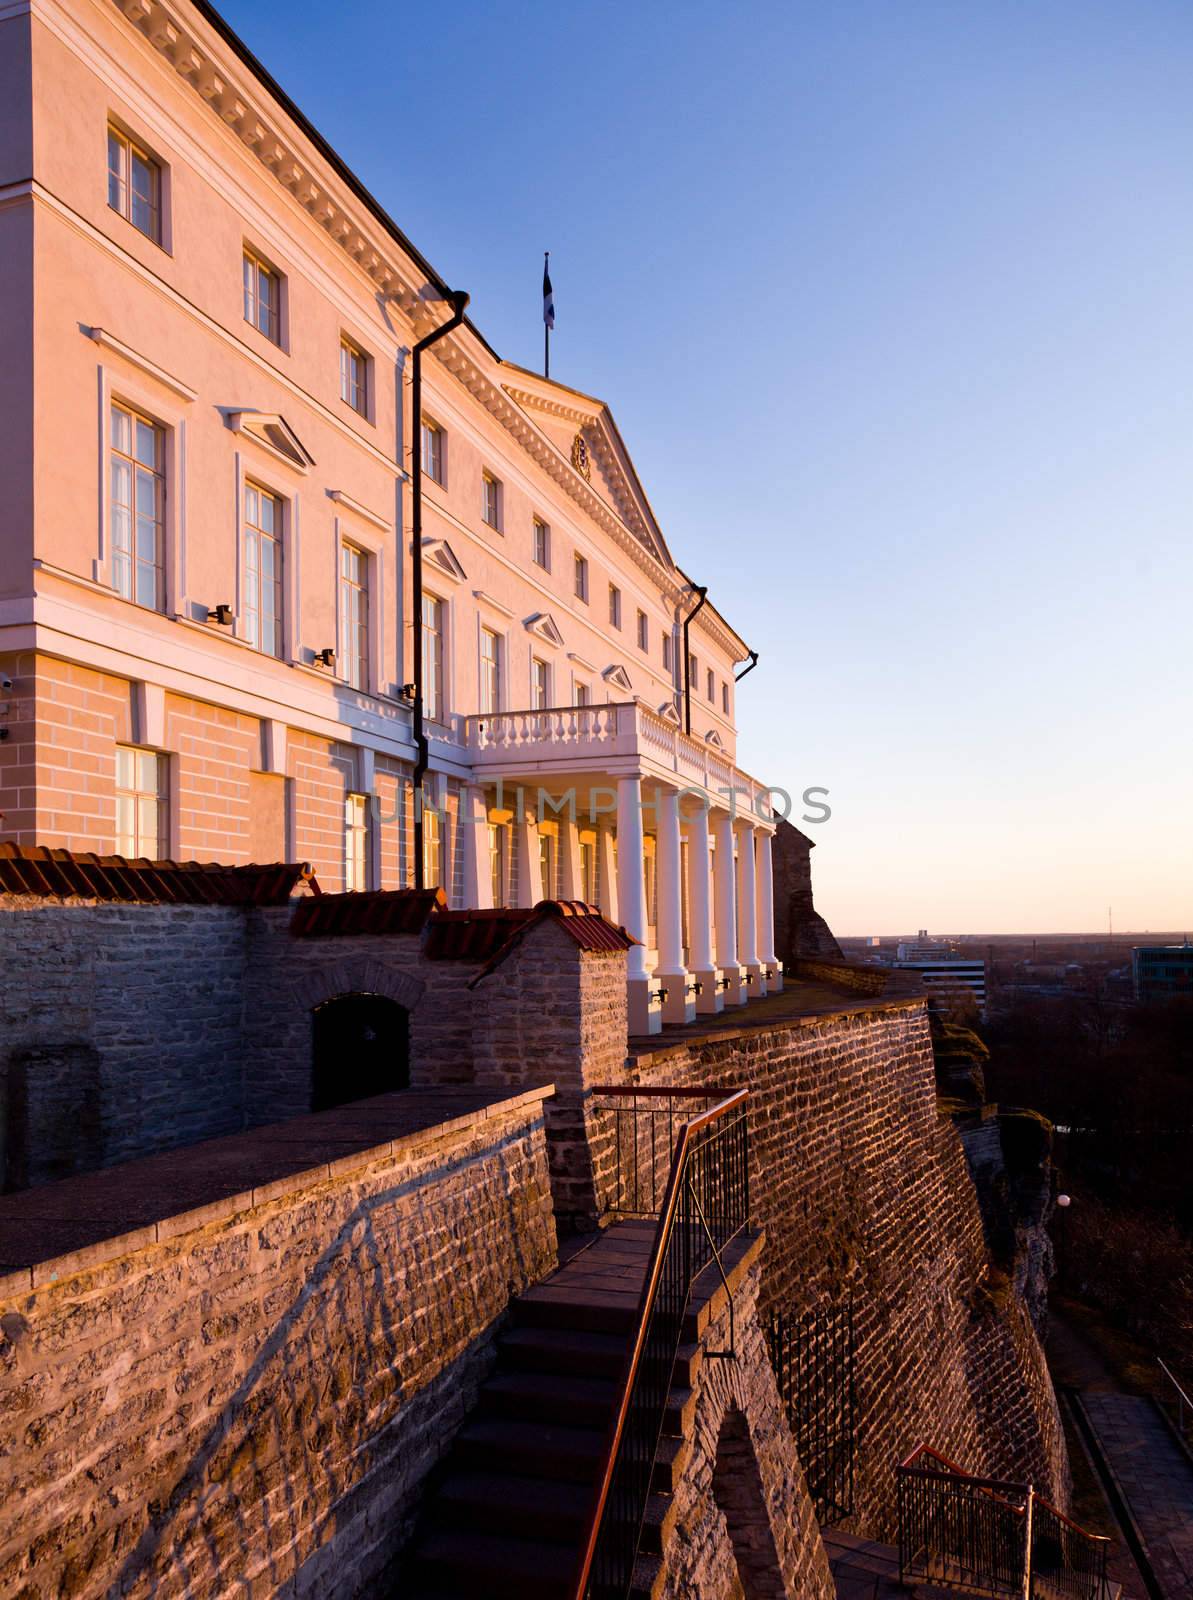 Government building above the town walls in Tallinn as the sun is setting